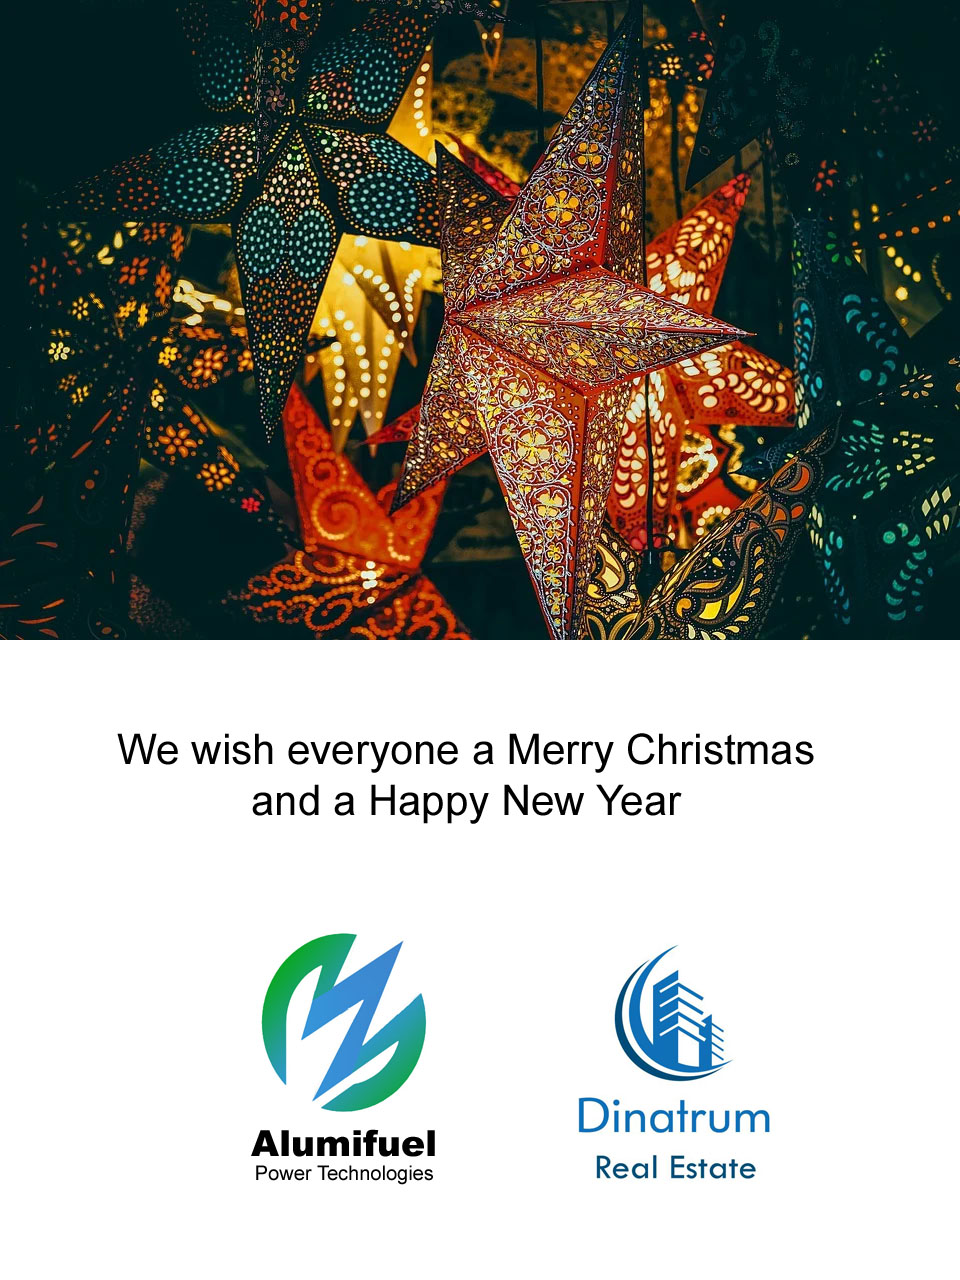 Alumifuel and Dinatrum wish everyone a Merry Christmas and a Happy New Year!